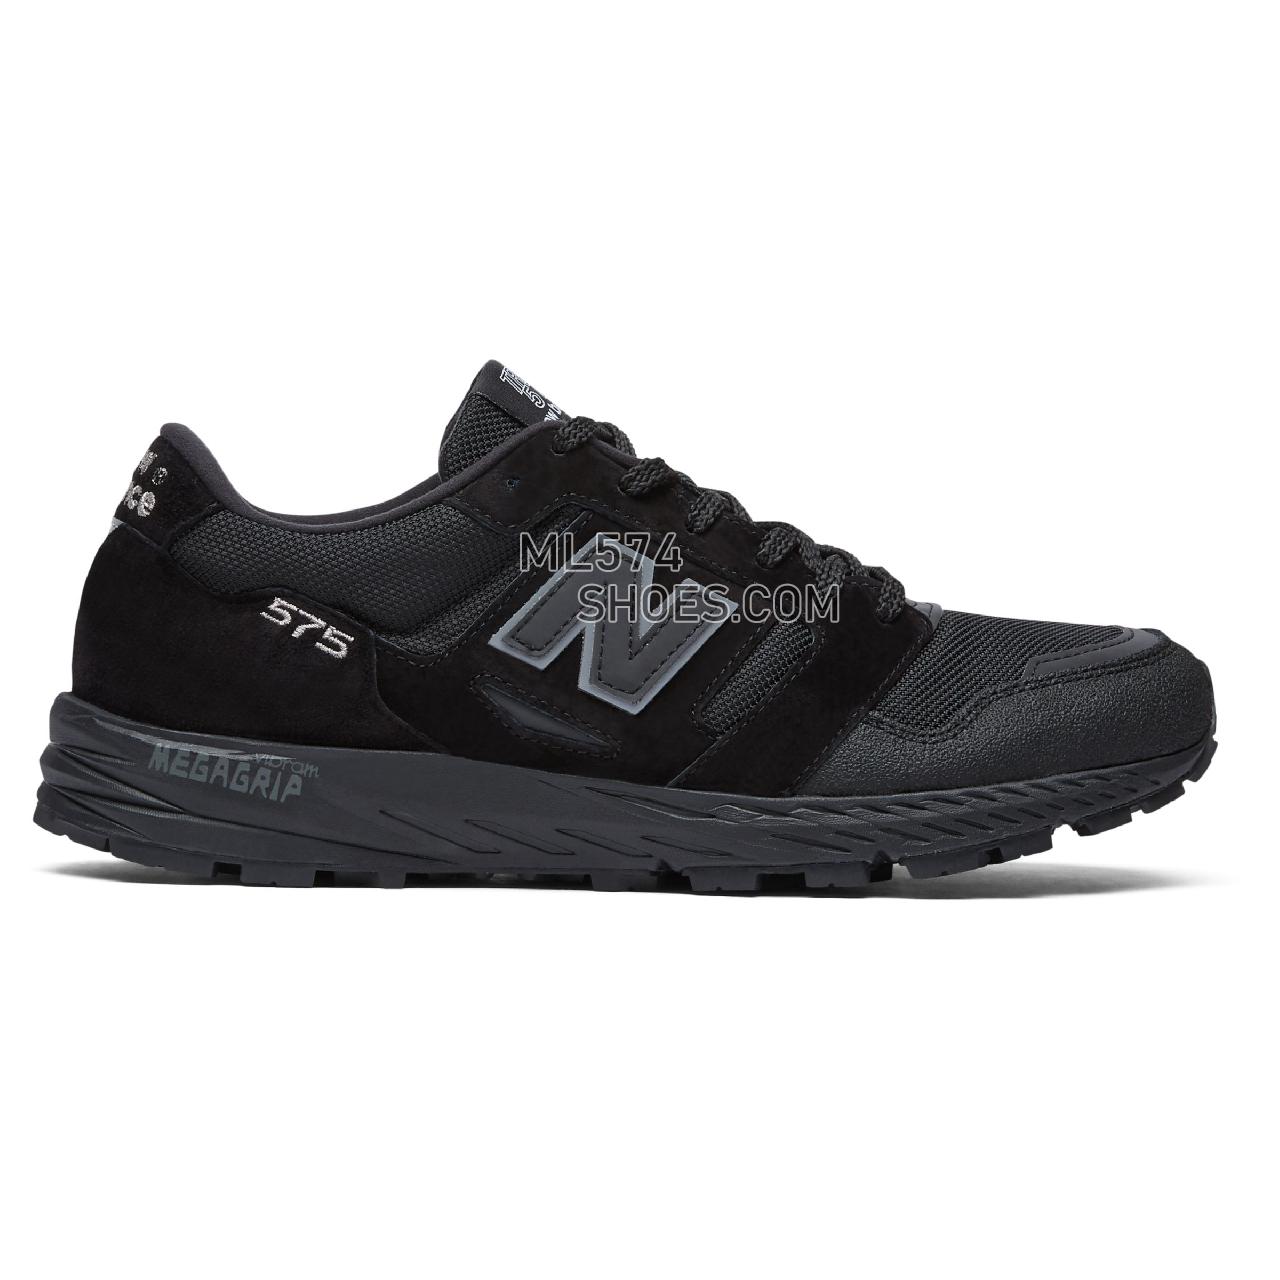 New Balance Made in UK 575 - Men's Made in UK 575 MTL575V1-27423-M - Black with Black Caviar and Lime - MTL575KL